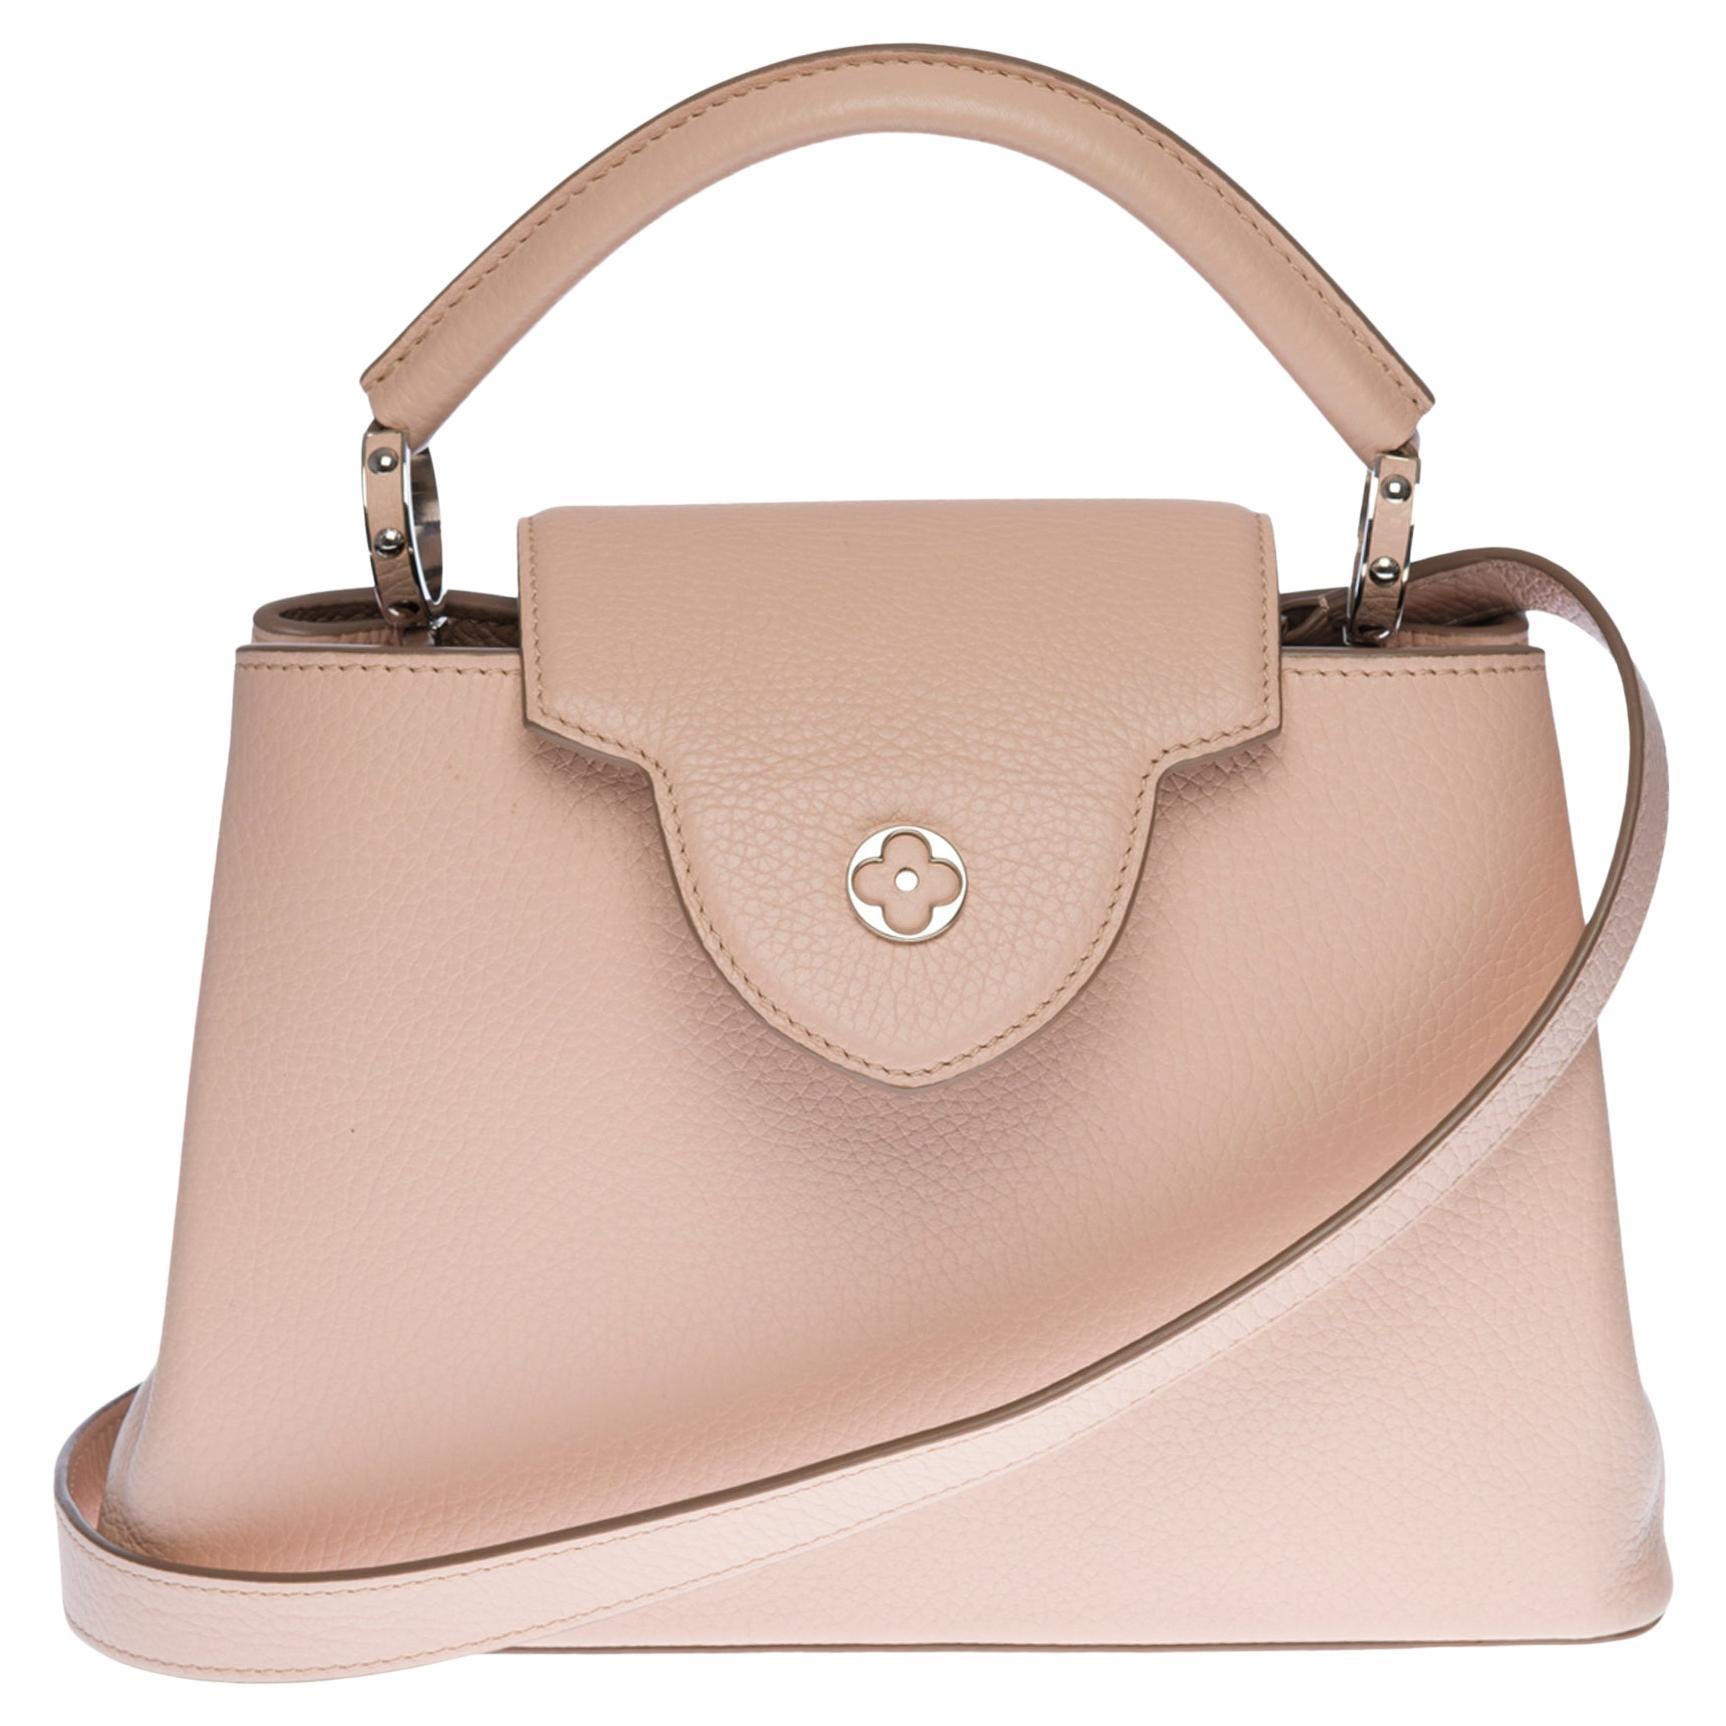 Louis Vuitton Capucines BB handbag with strap in Pink Taurillon leather, SHW